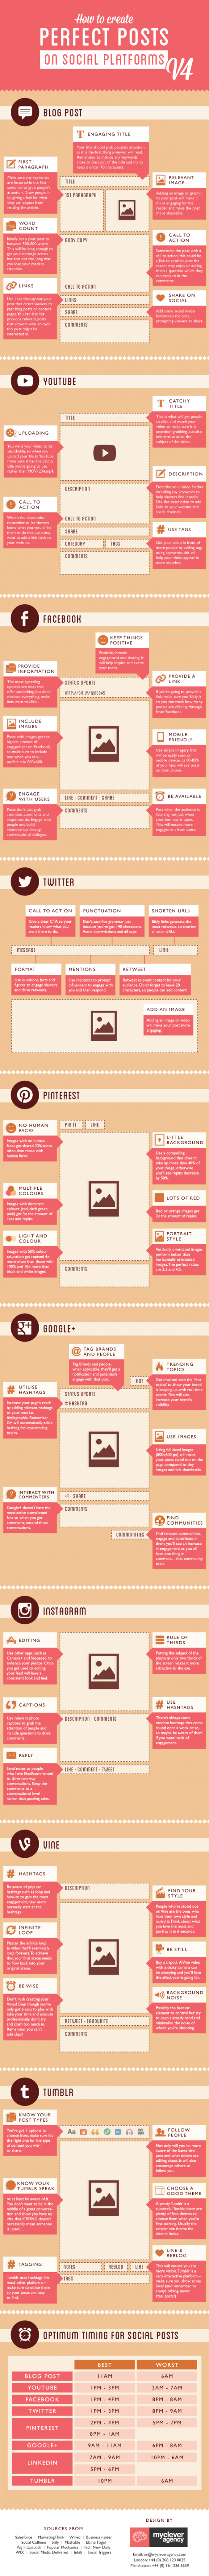 How-to-create-perfect-social-media-posts-infographic